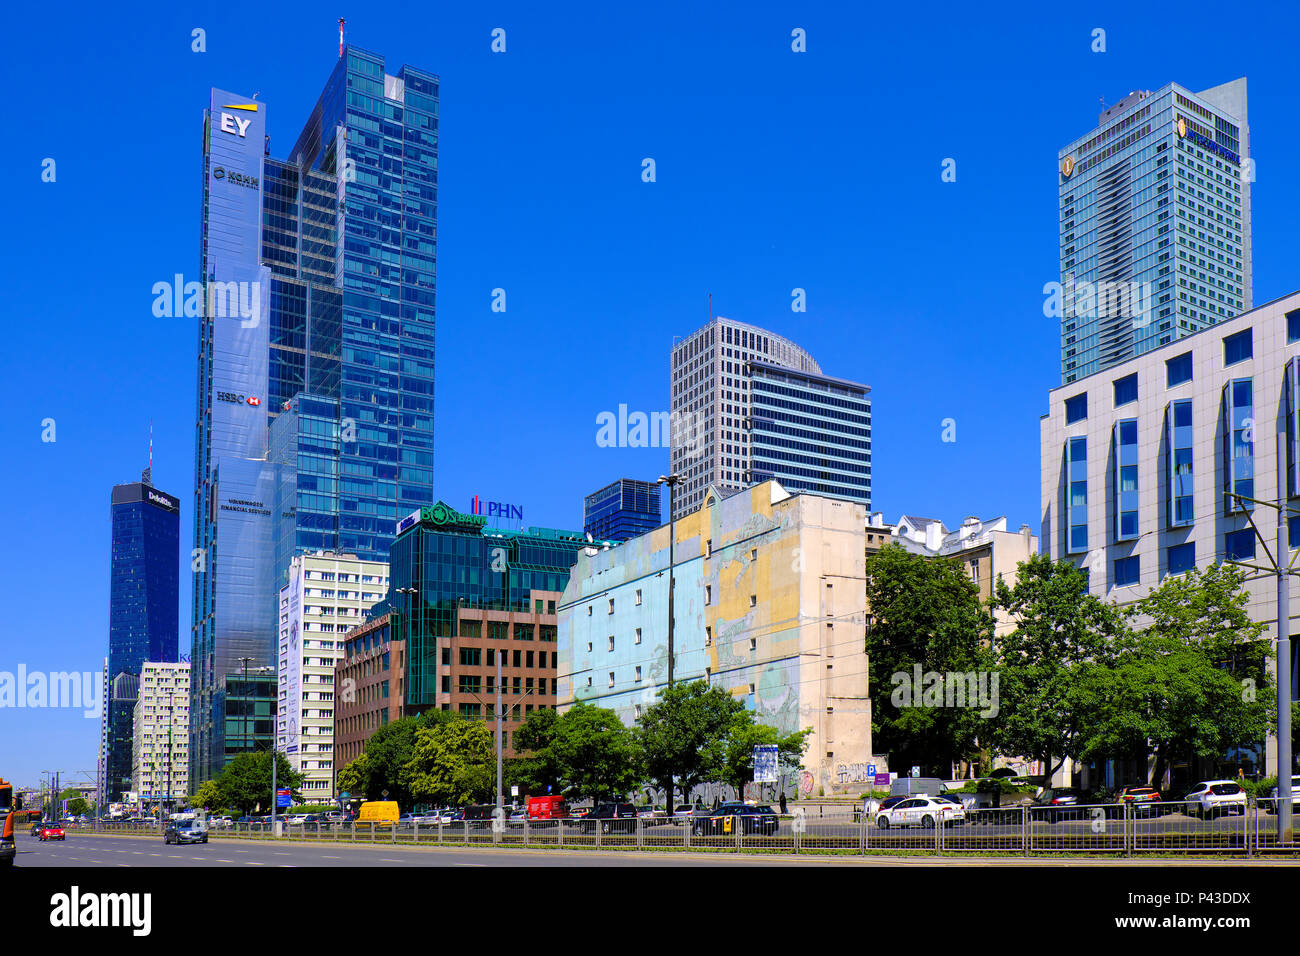 Warsaw, Masovia / Poland - 2018/06/08: Panoramic view of city center with modern skyscrapers - Rondo One R1 at ONZ roundabout and Q22 at 22 Jana Pawla Stock Photo